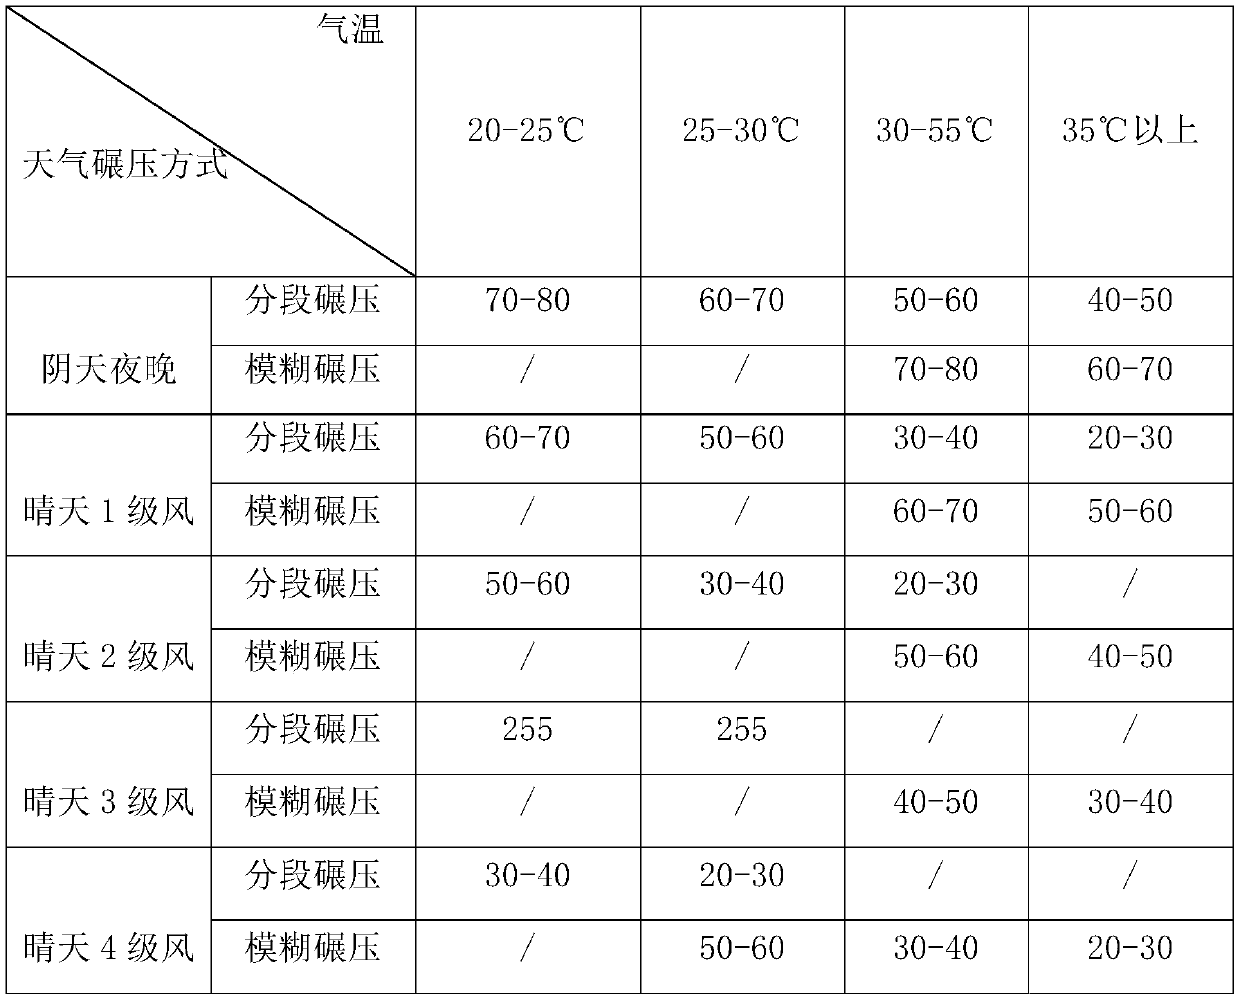 Cement stabilized macadam mixture and road base layer construction method used in high-temperature seasons